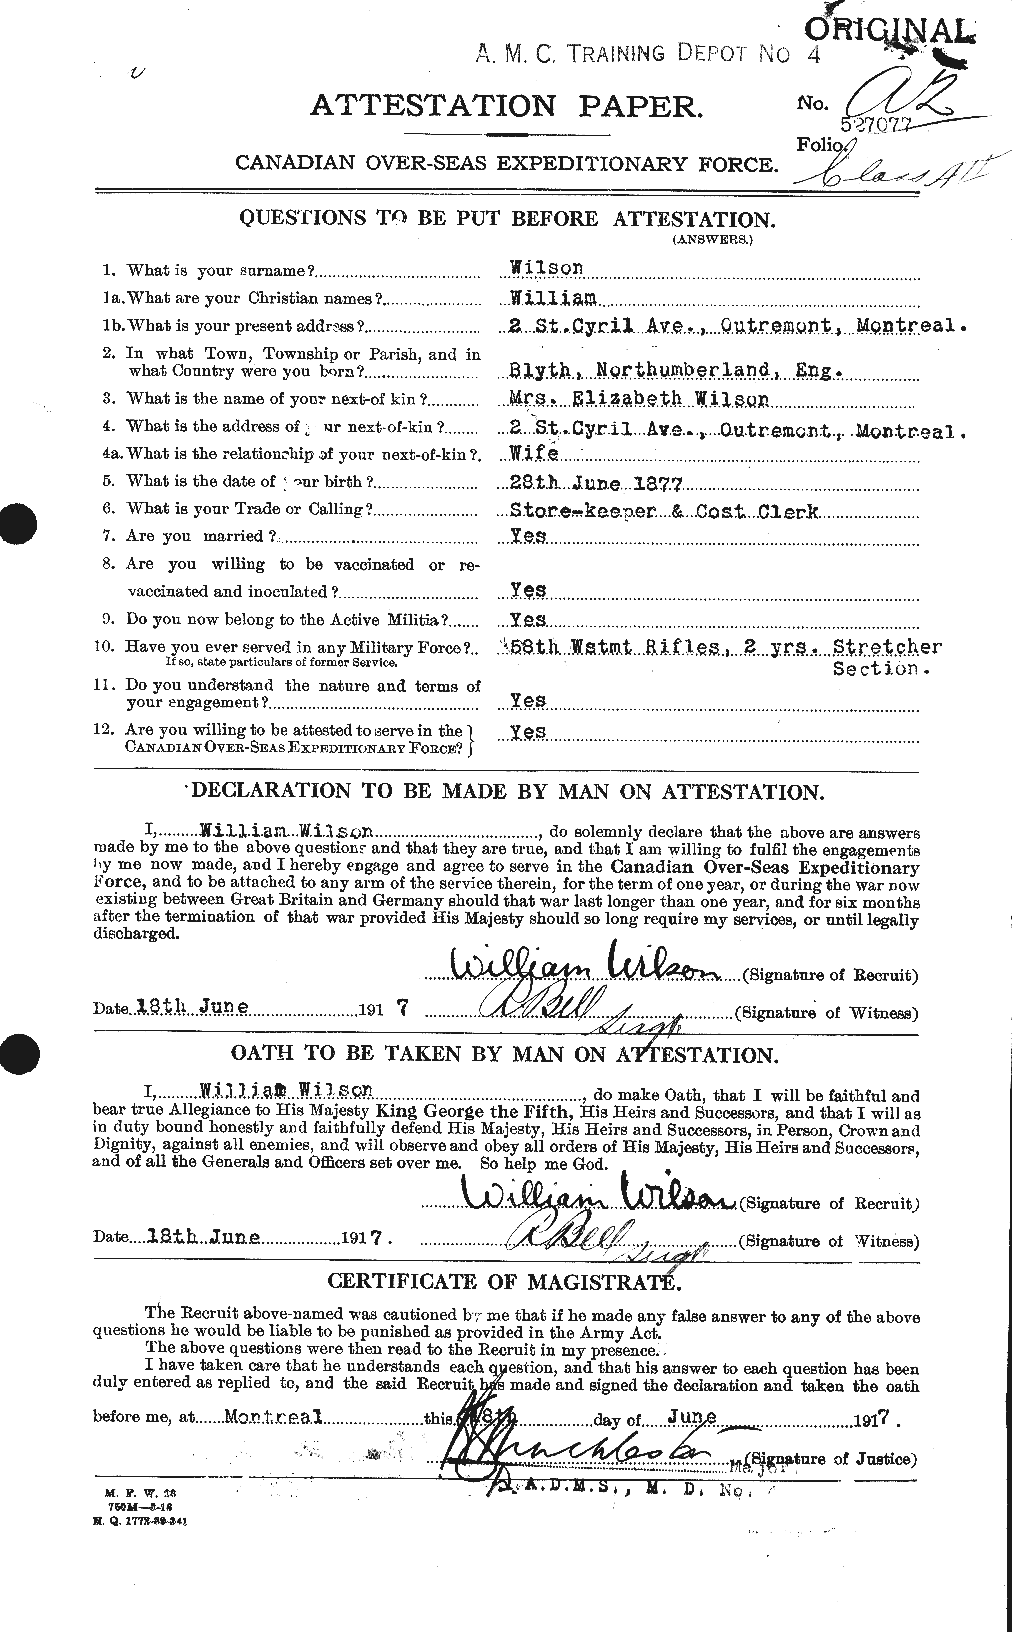 Personnel Records of the First World War - CEF 681815a